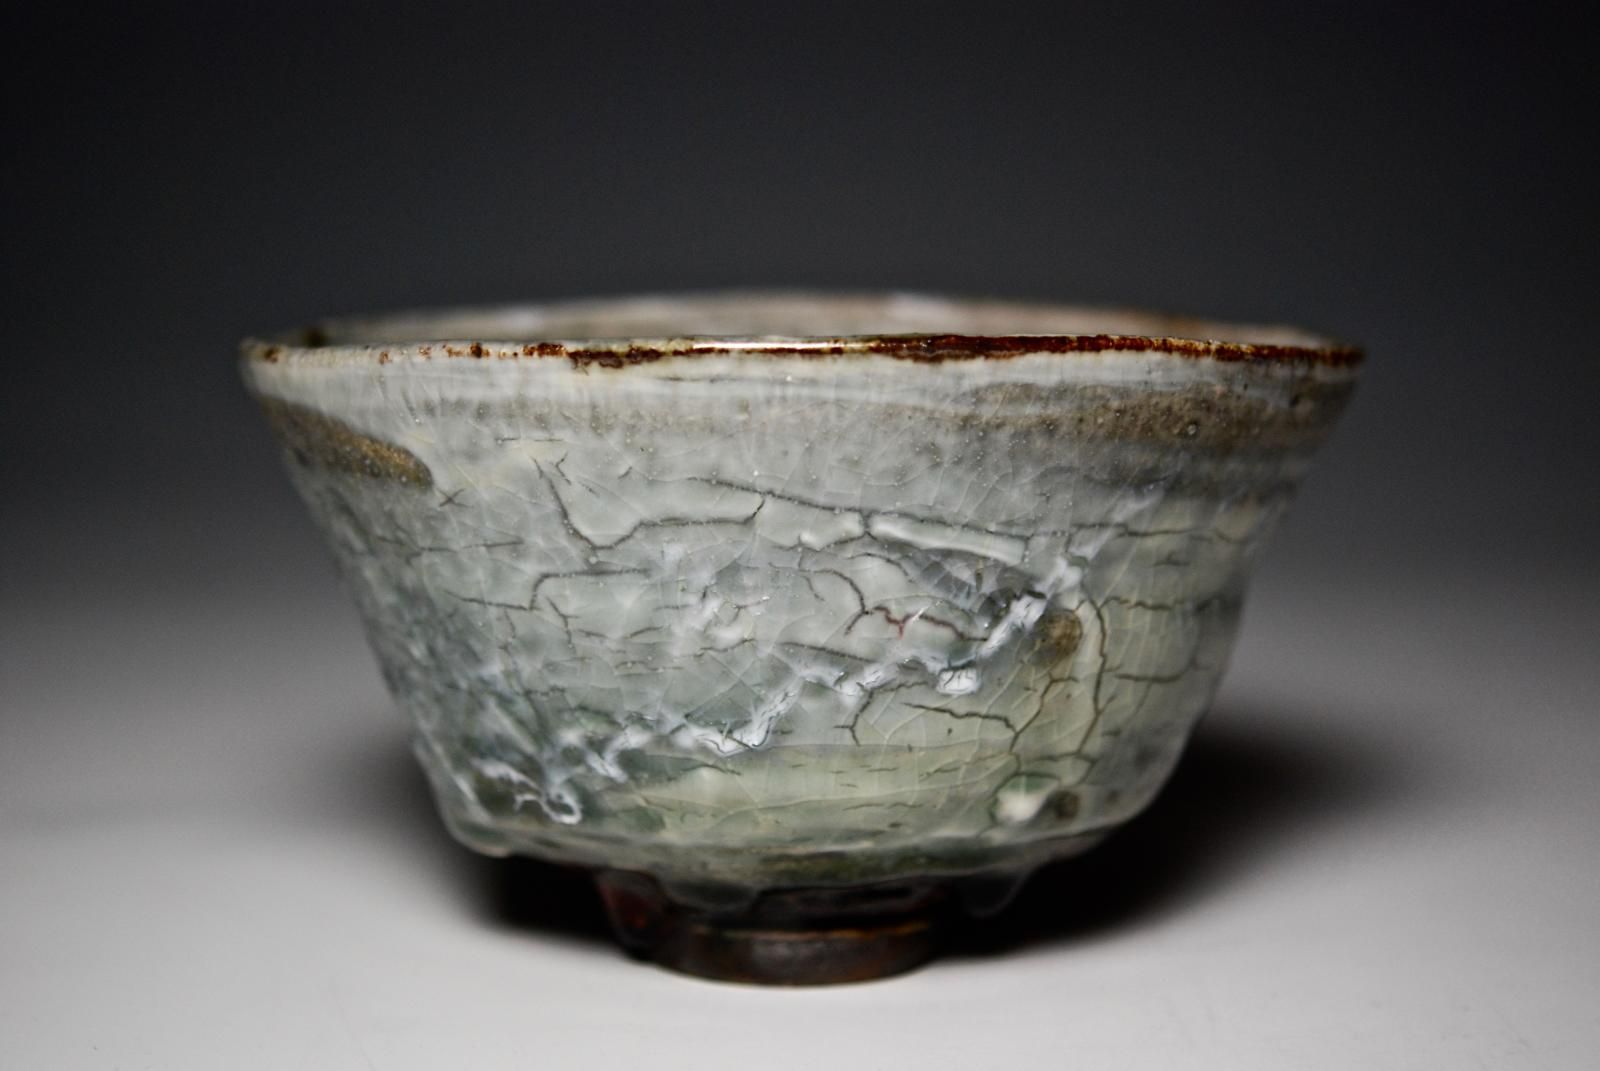 Wheel thrown Chawan, using black clay with celadon and copper oxide glaze, and a frosted over glaze.  Fired in a reduction atmosphere in an oil fuelled kiln. by Margaret Curtis